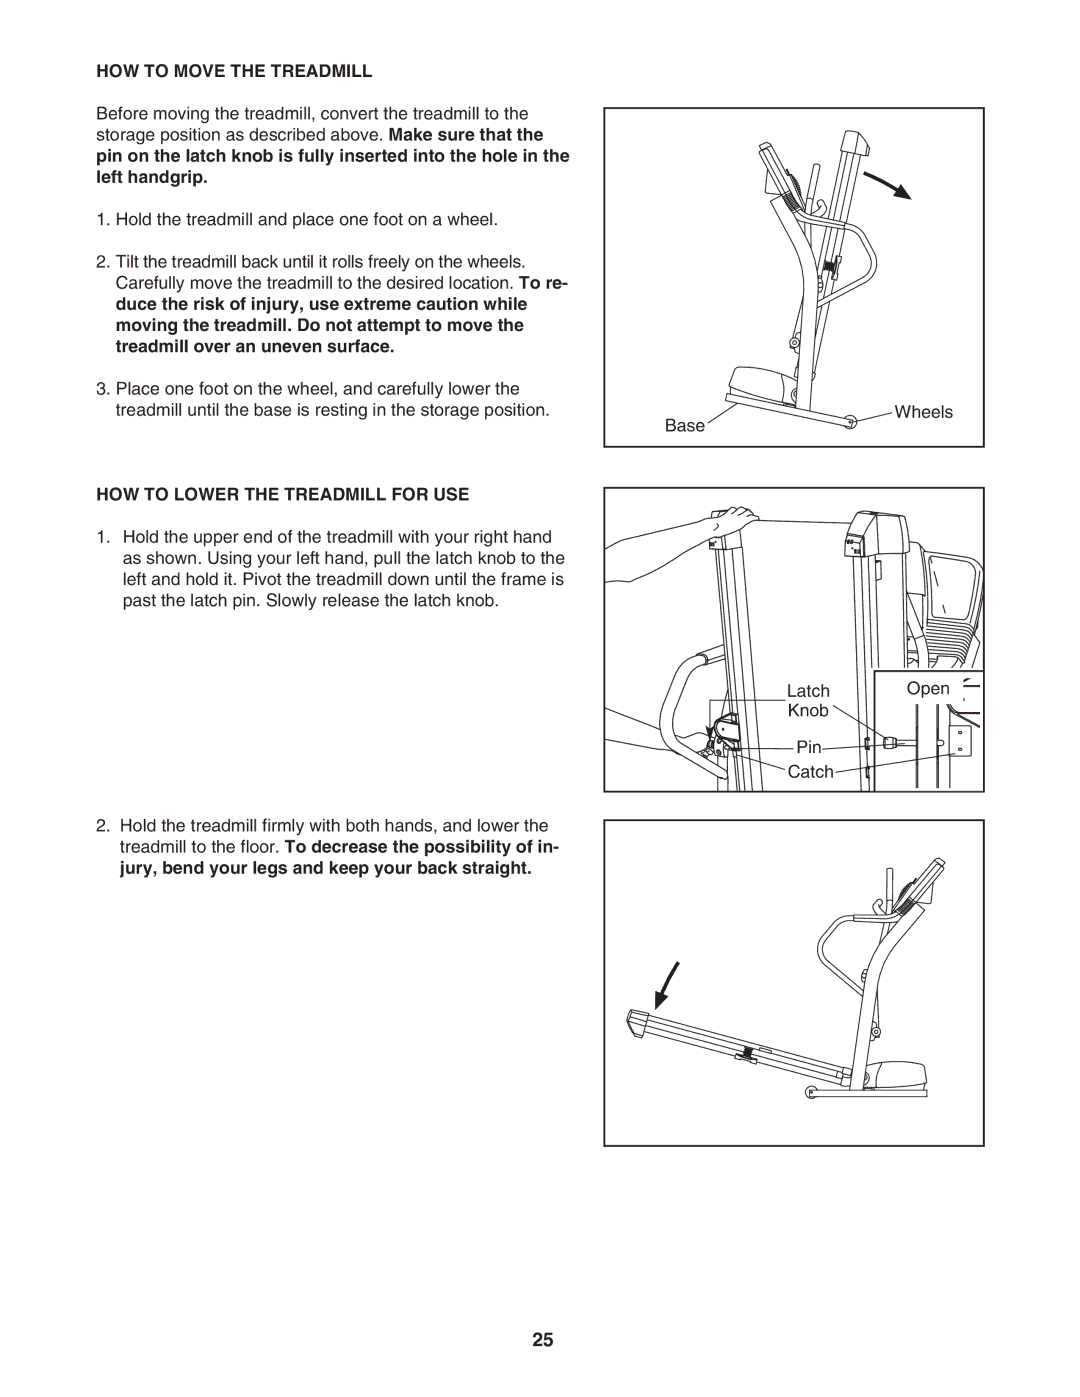 ProForm PFTL591040 user manual HOW to Move the Treadmill, HOW to Lower the Treadmill for USE 